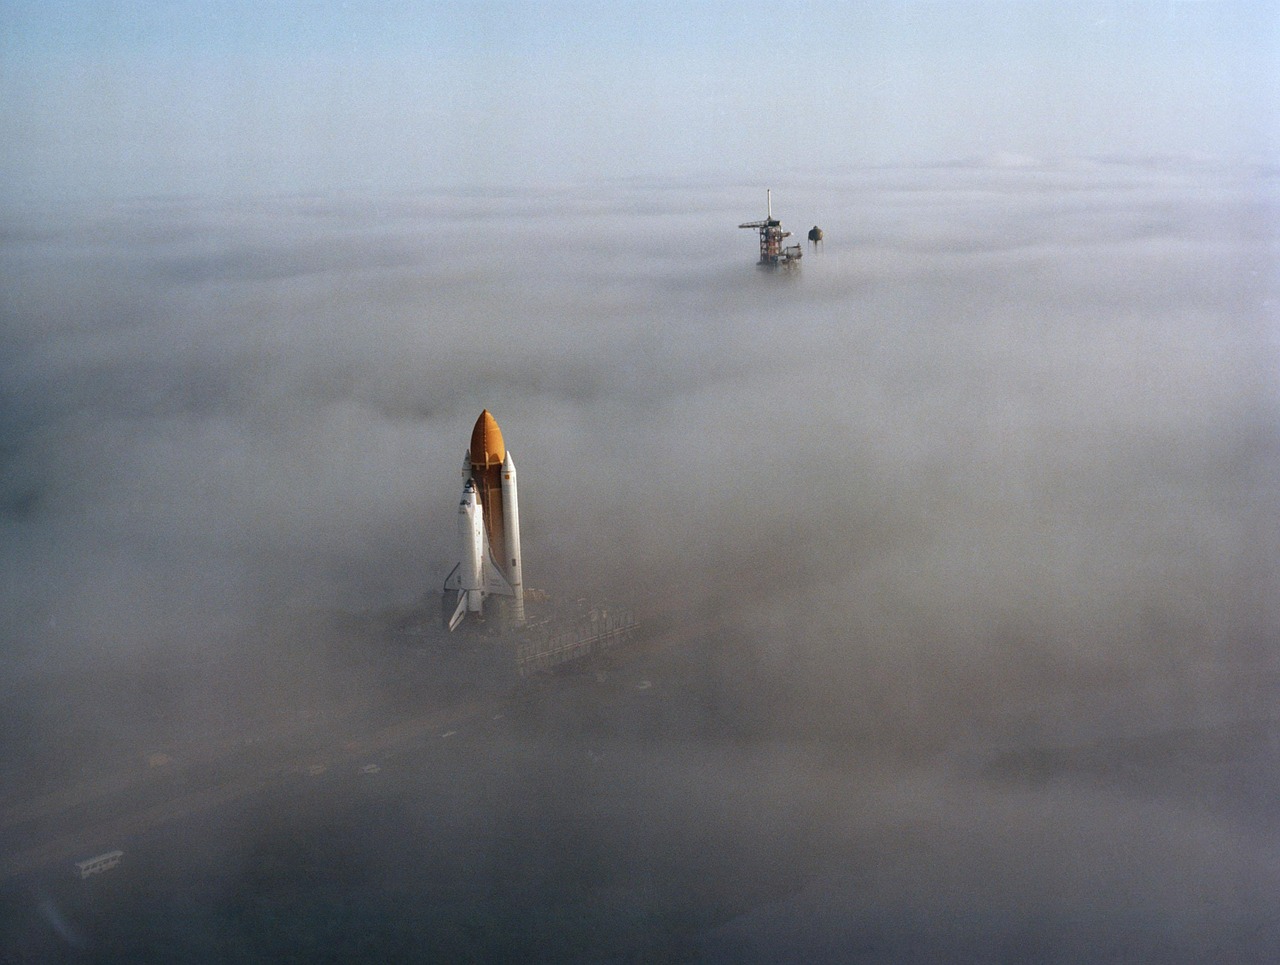 space shuttle cape canaveral rollout free photo